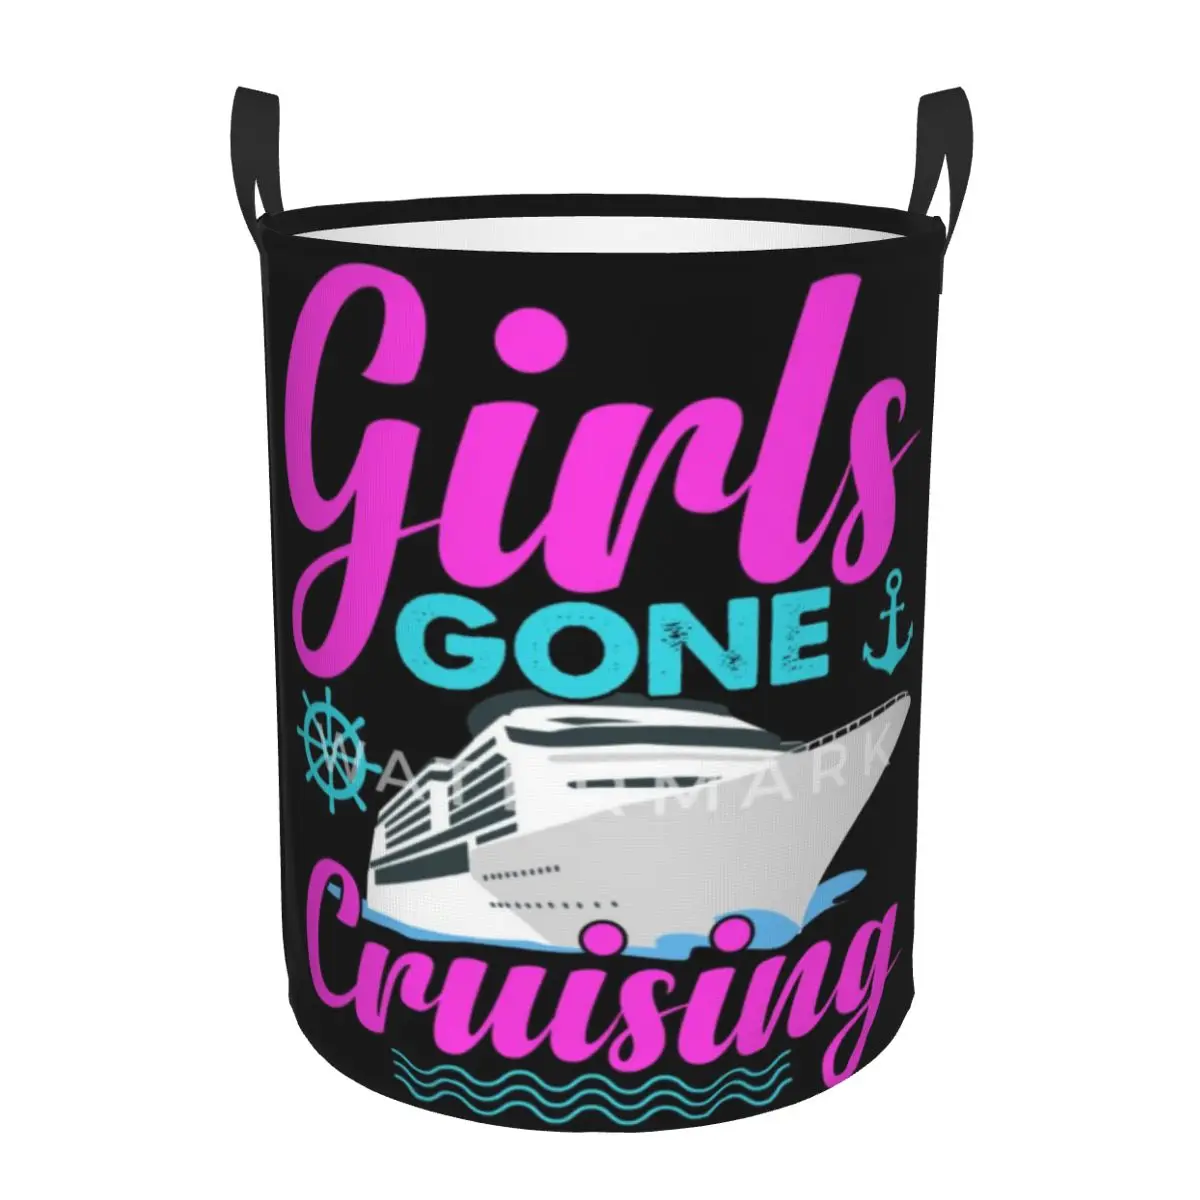 

Girls Gone Cruising Matching Cruise Vacation Circular hamper,Storage Basket With Two handles bathroomsStorage of clothes